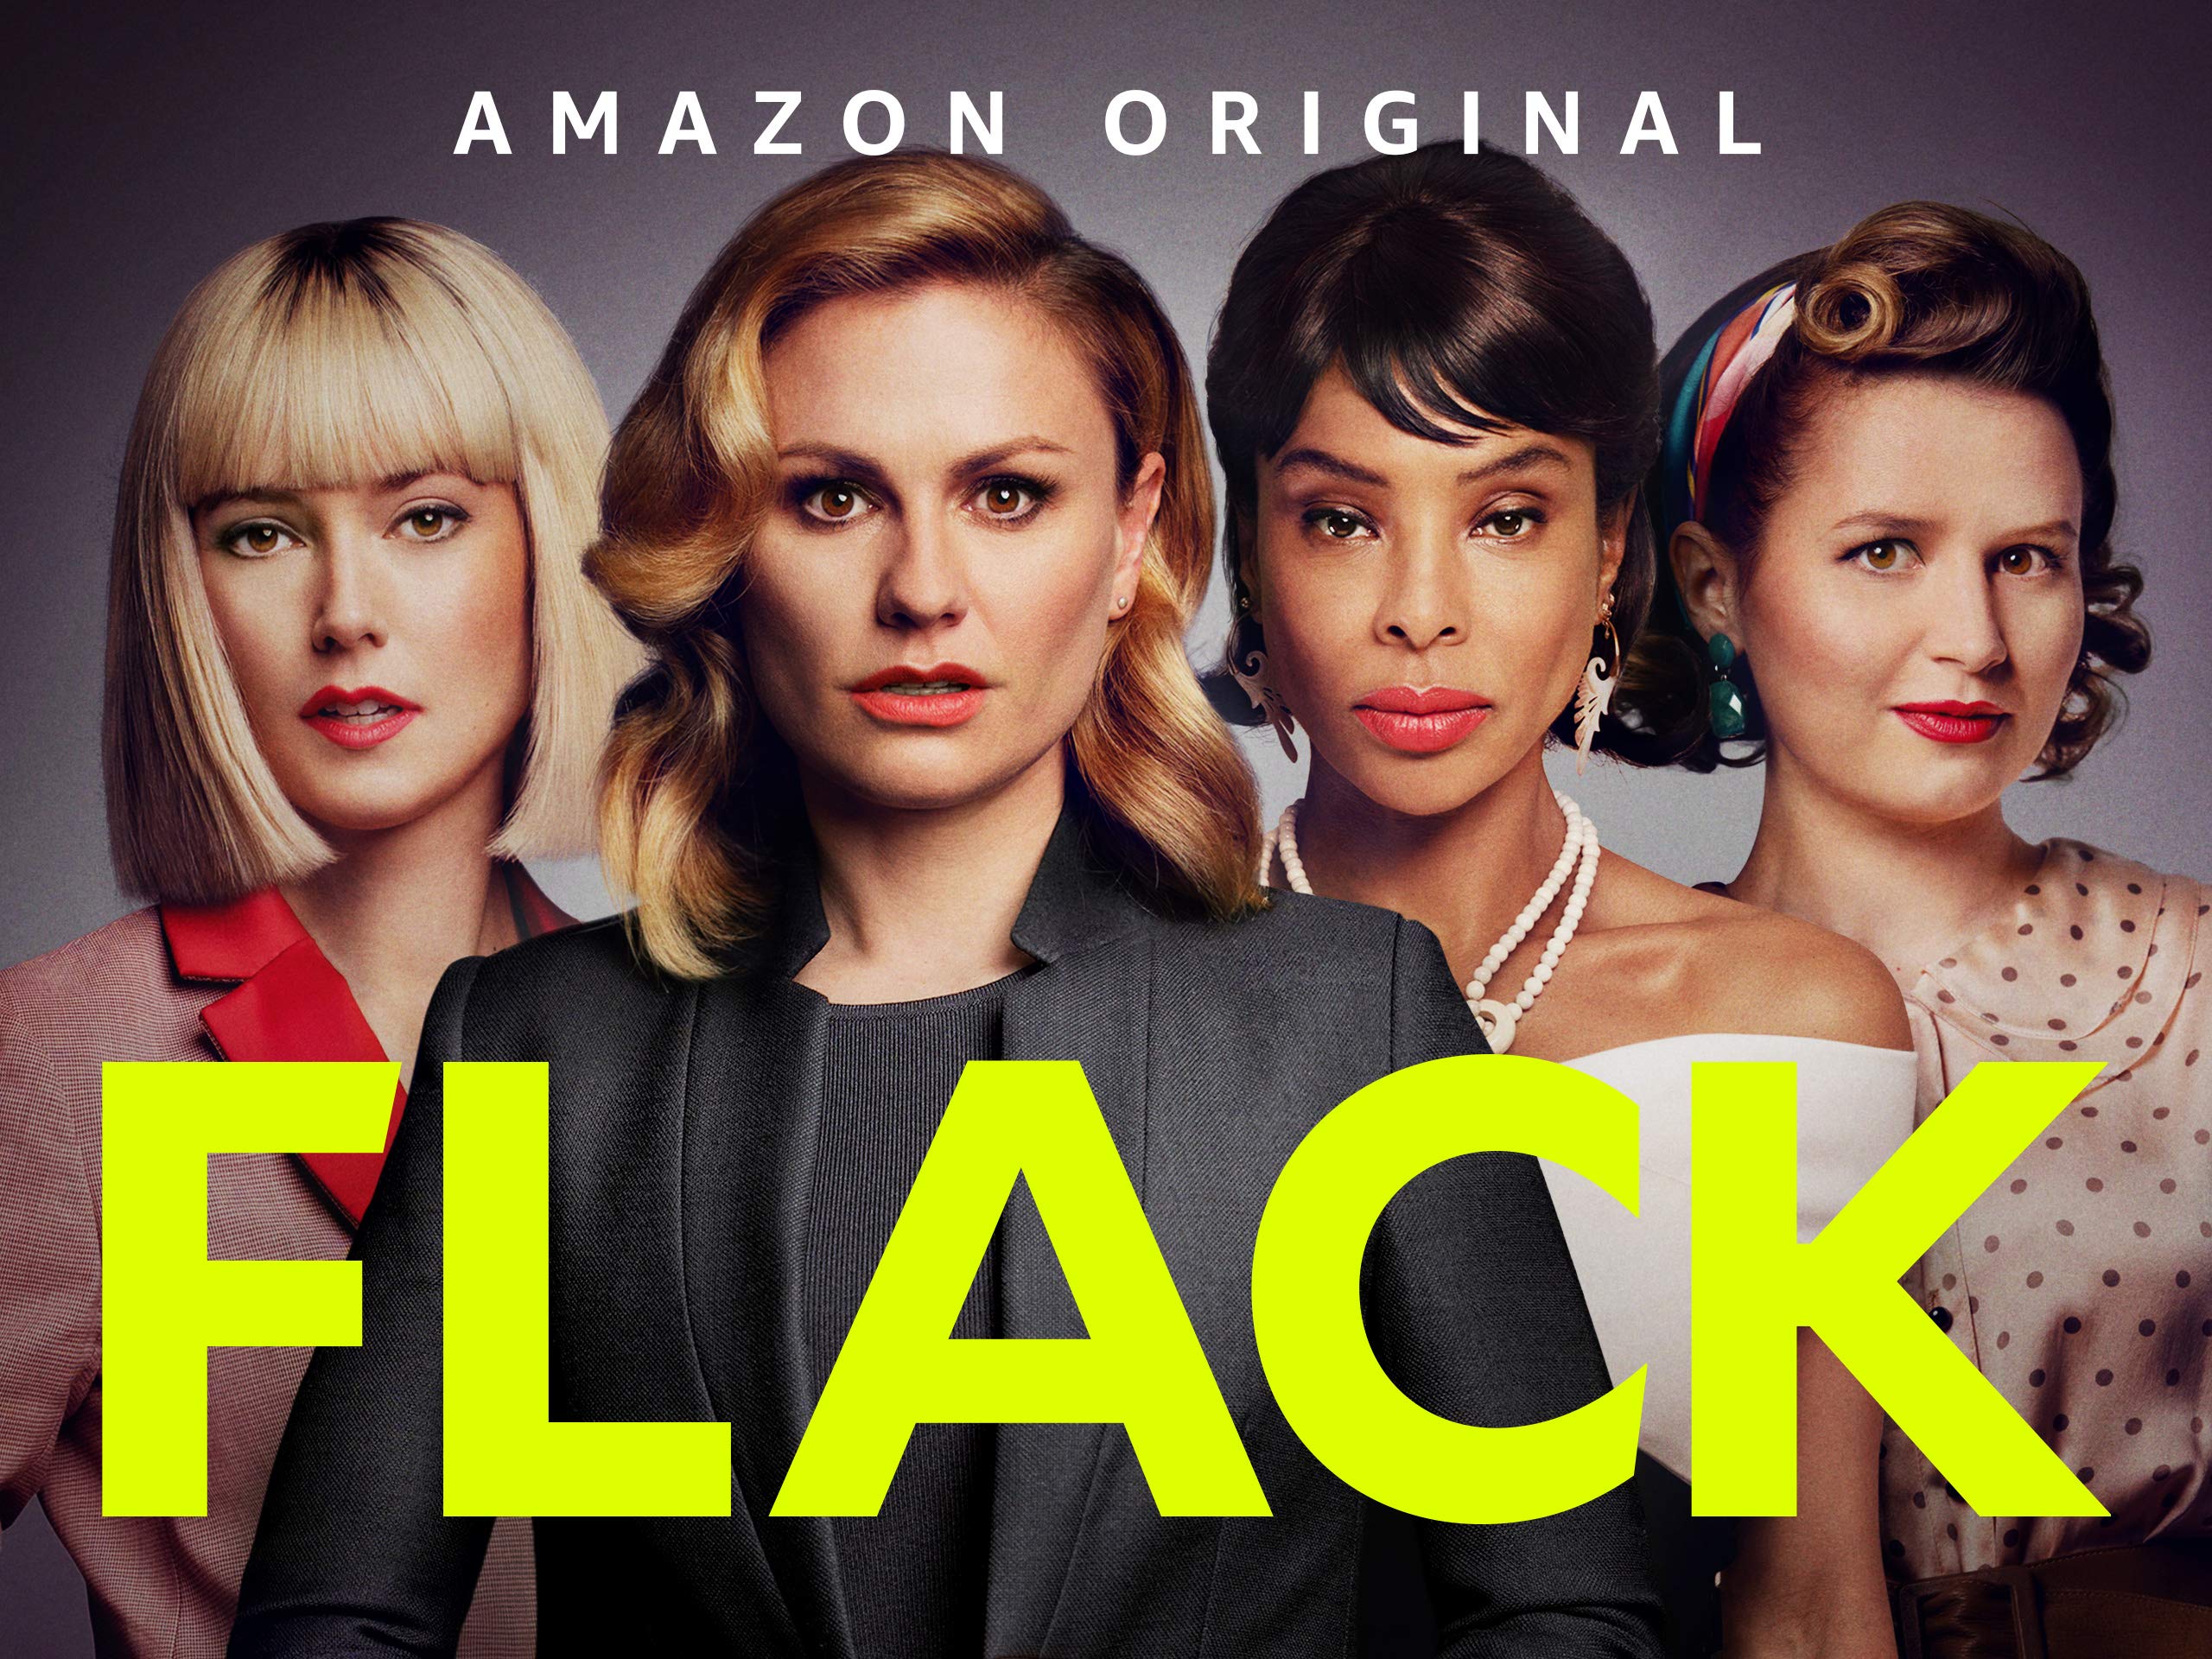 Flack Season 2: Release Date, Trailer, Cast and Updates!